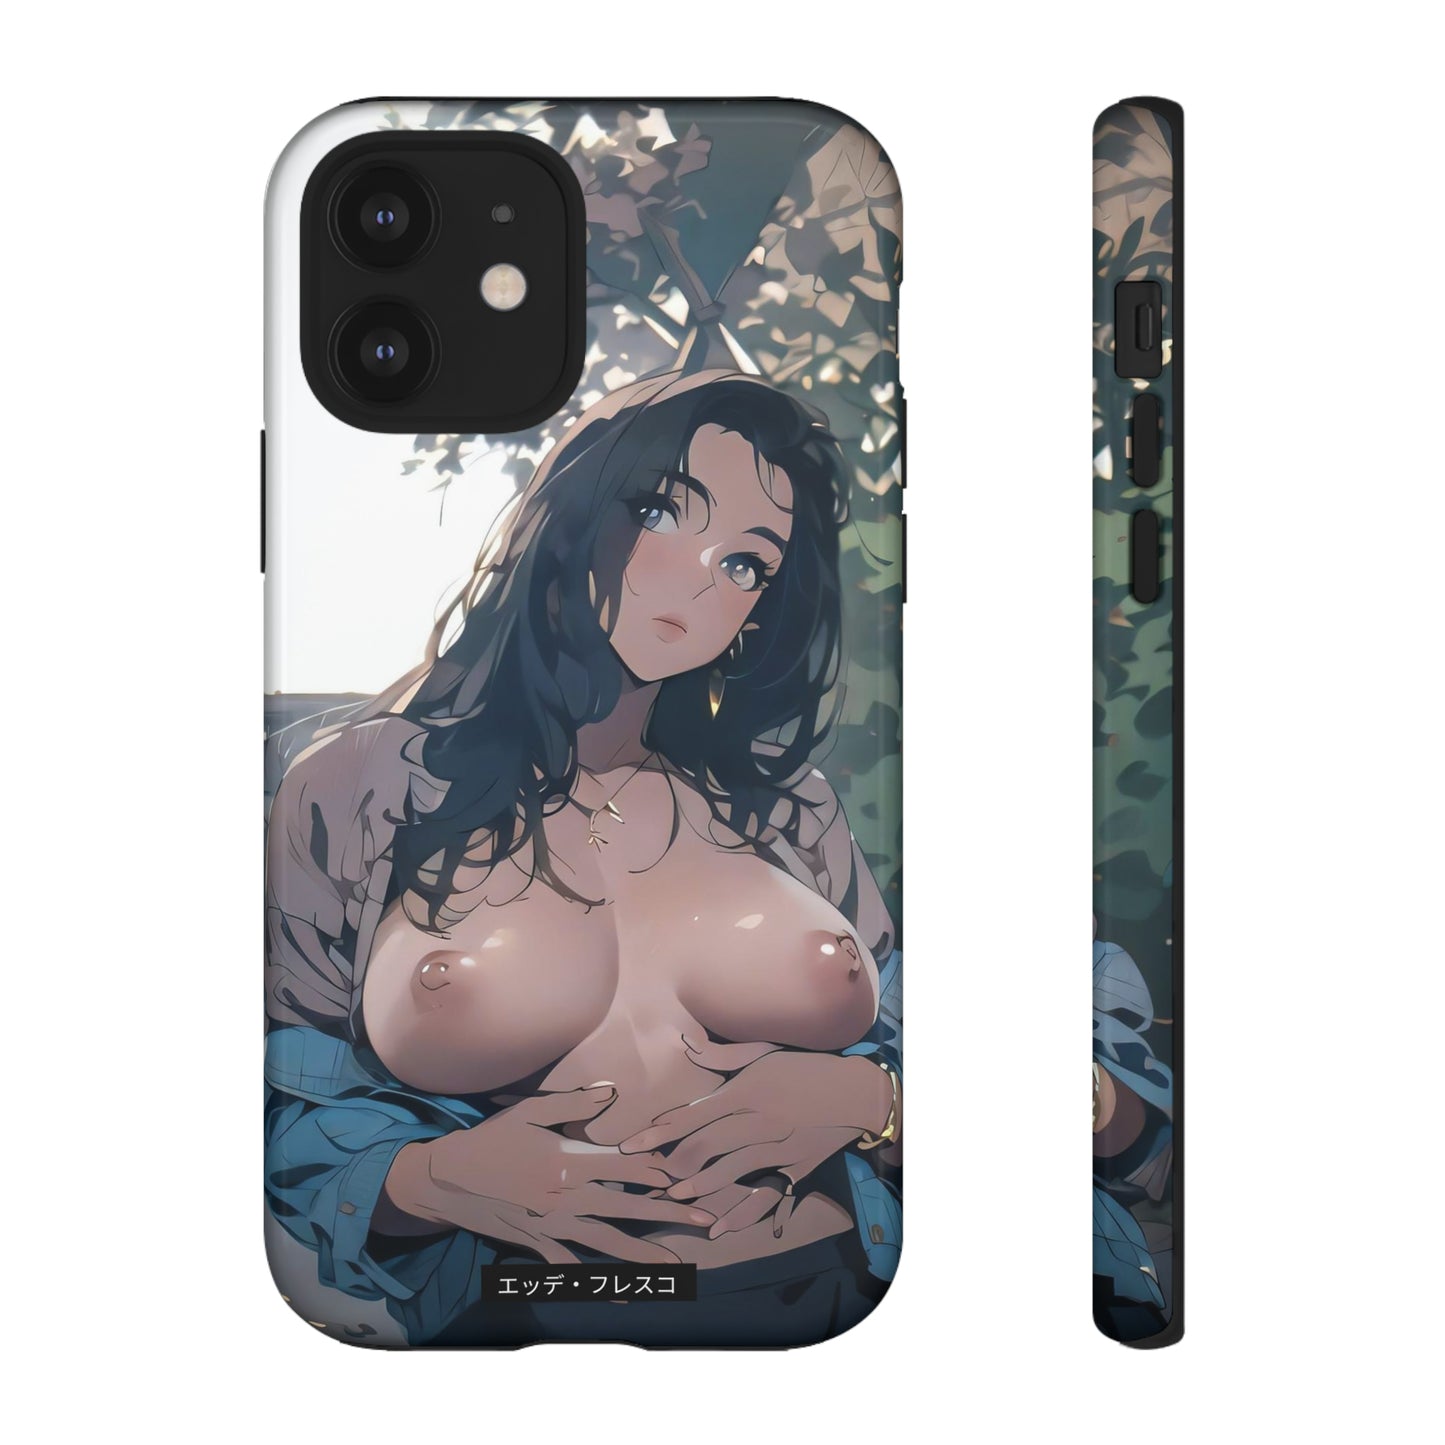 Anime Style Art Tough Cases- "Forest Love"